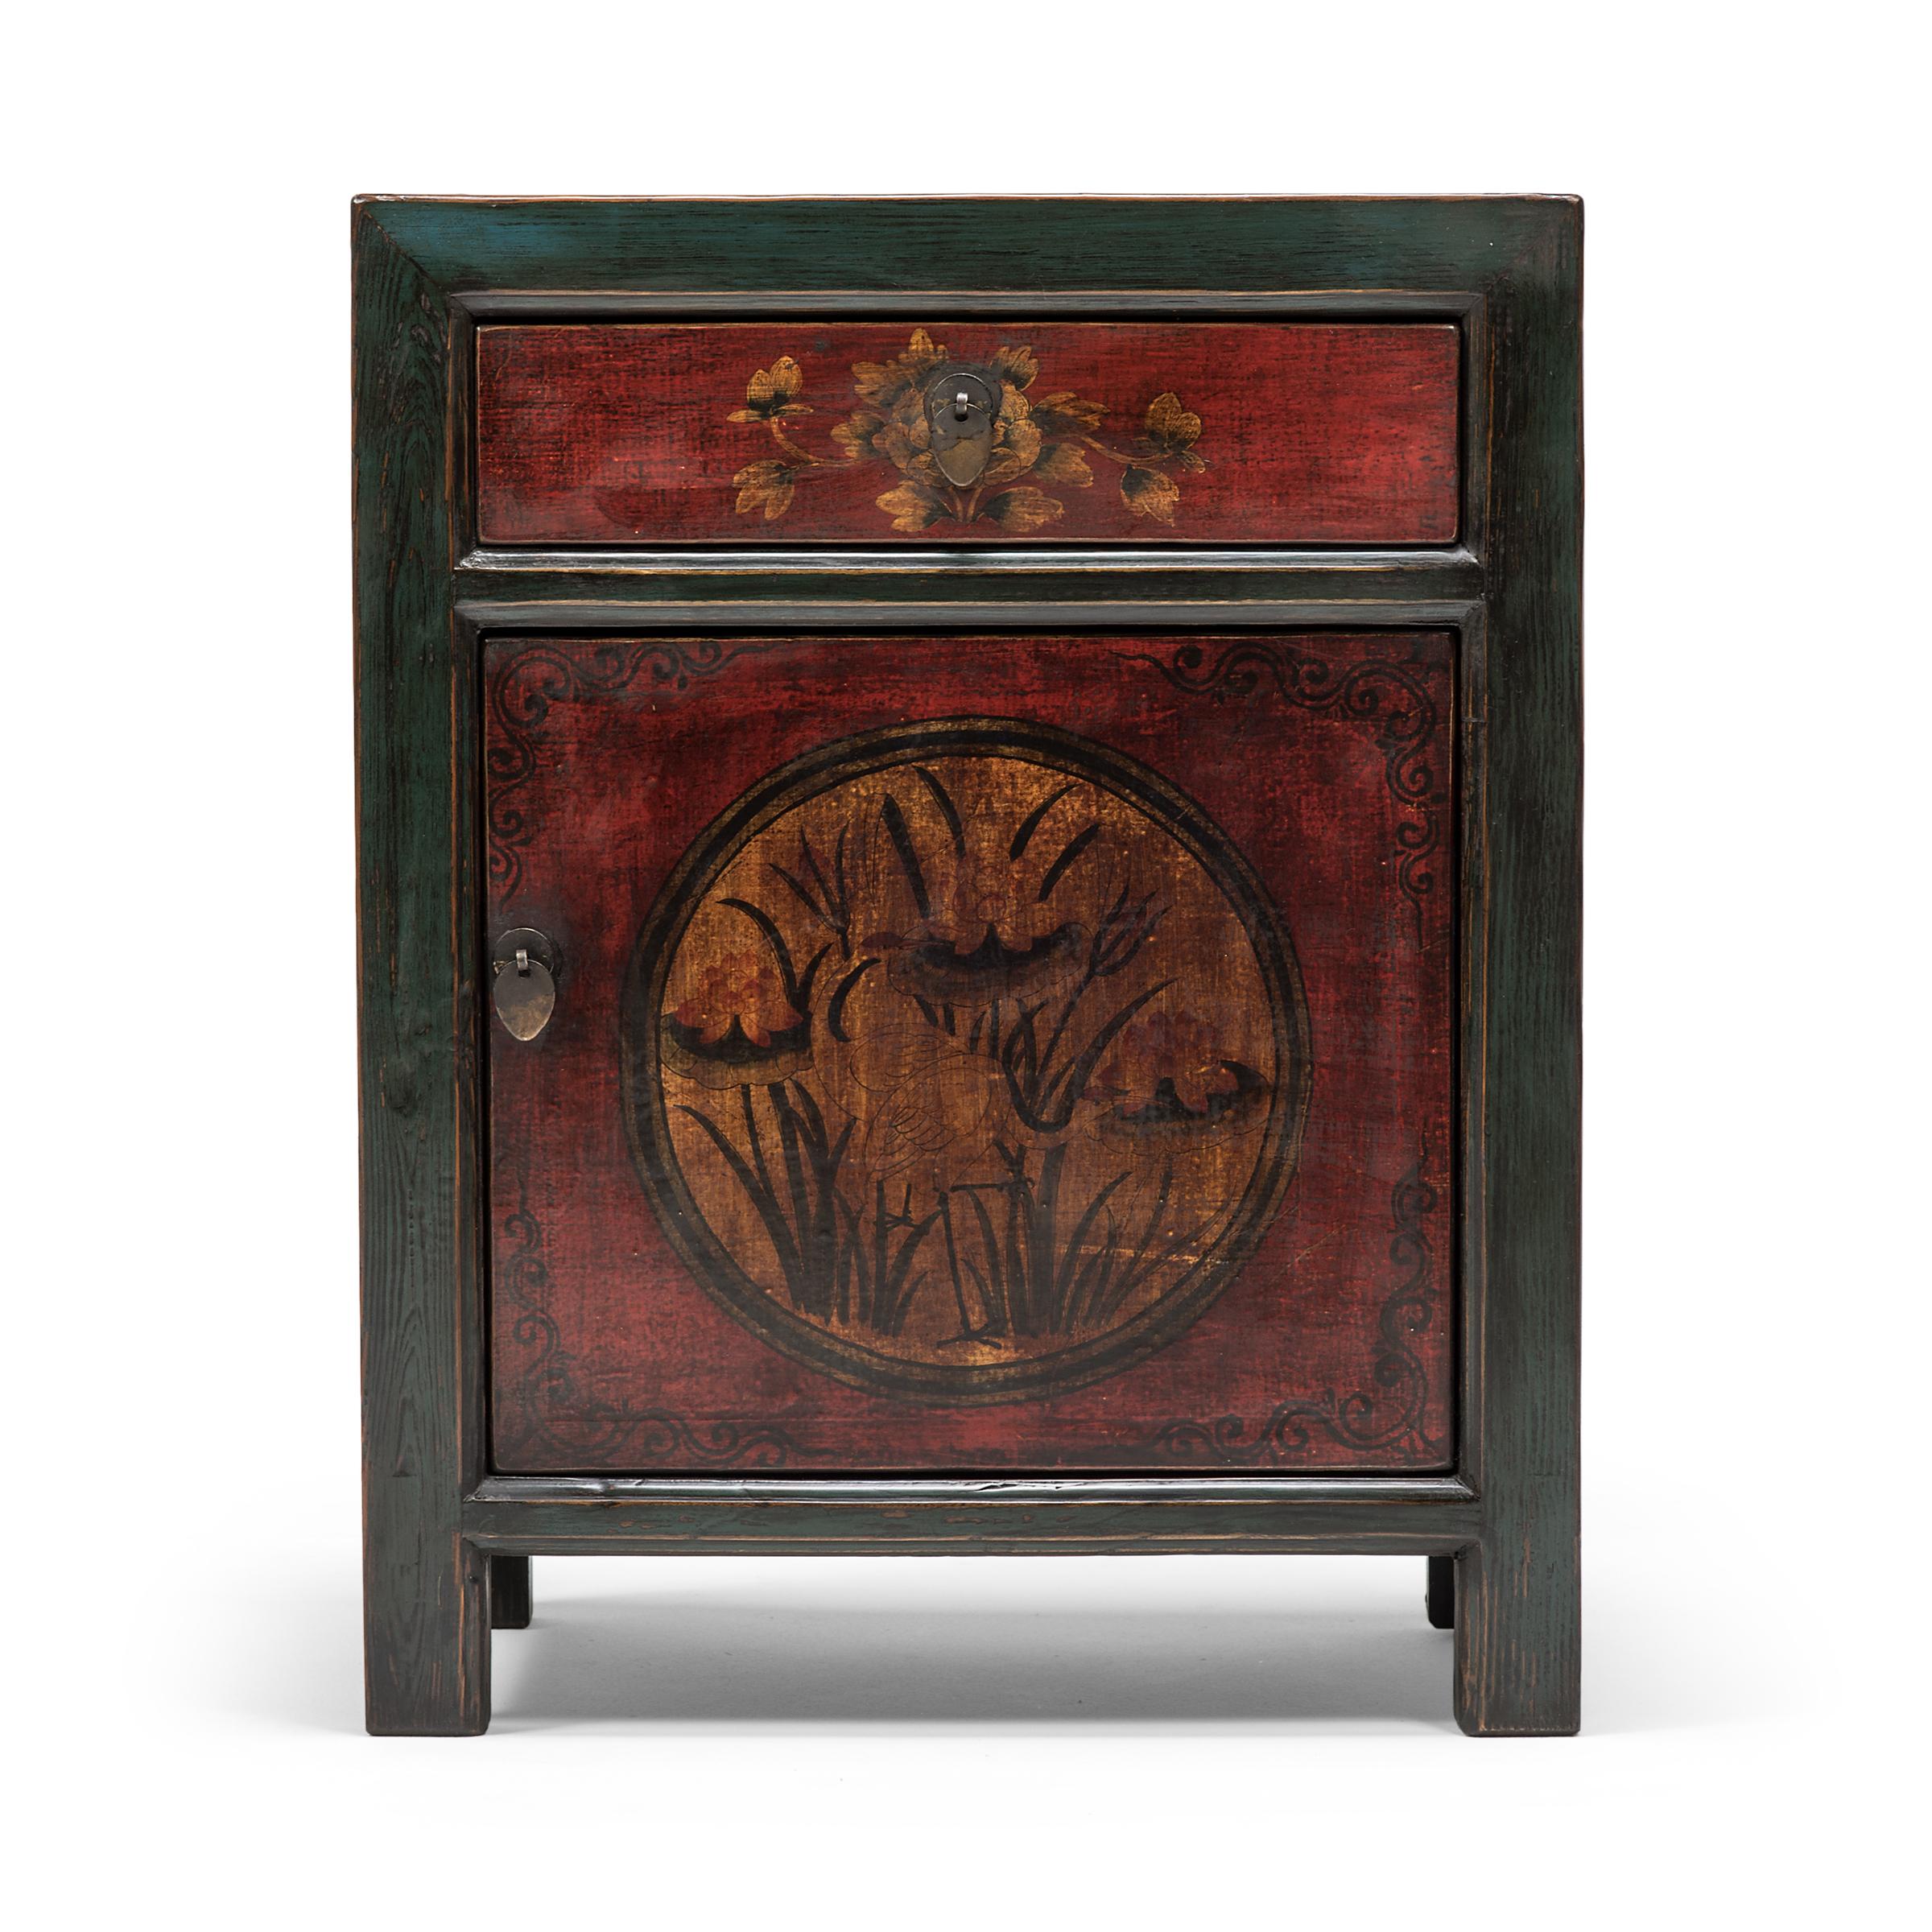 Outlined by simple, blue-green frames, delicate painted floral panels adorn the fronts of these early 20th century chests from Mongolia. The left chest is painted with a graceful heron surrounded by lotus blossoms, a traditional motif that conveys